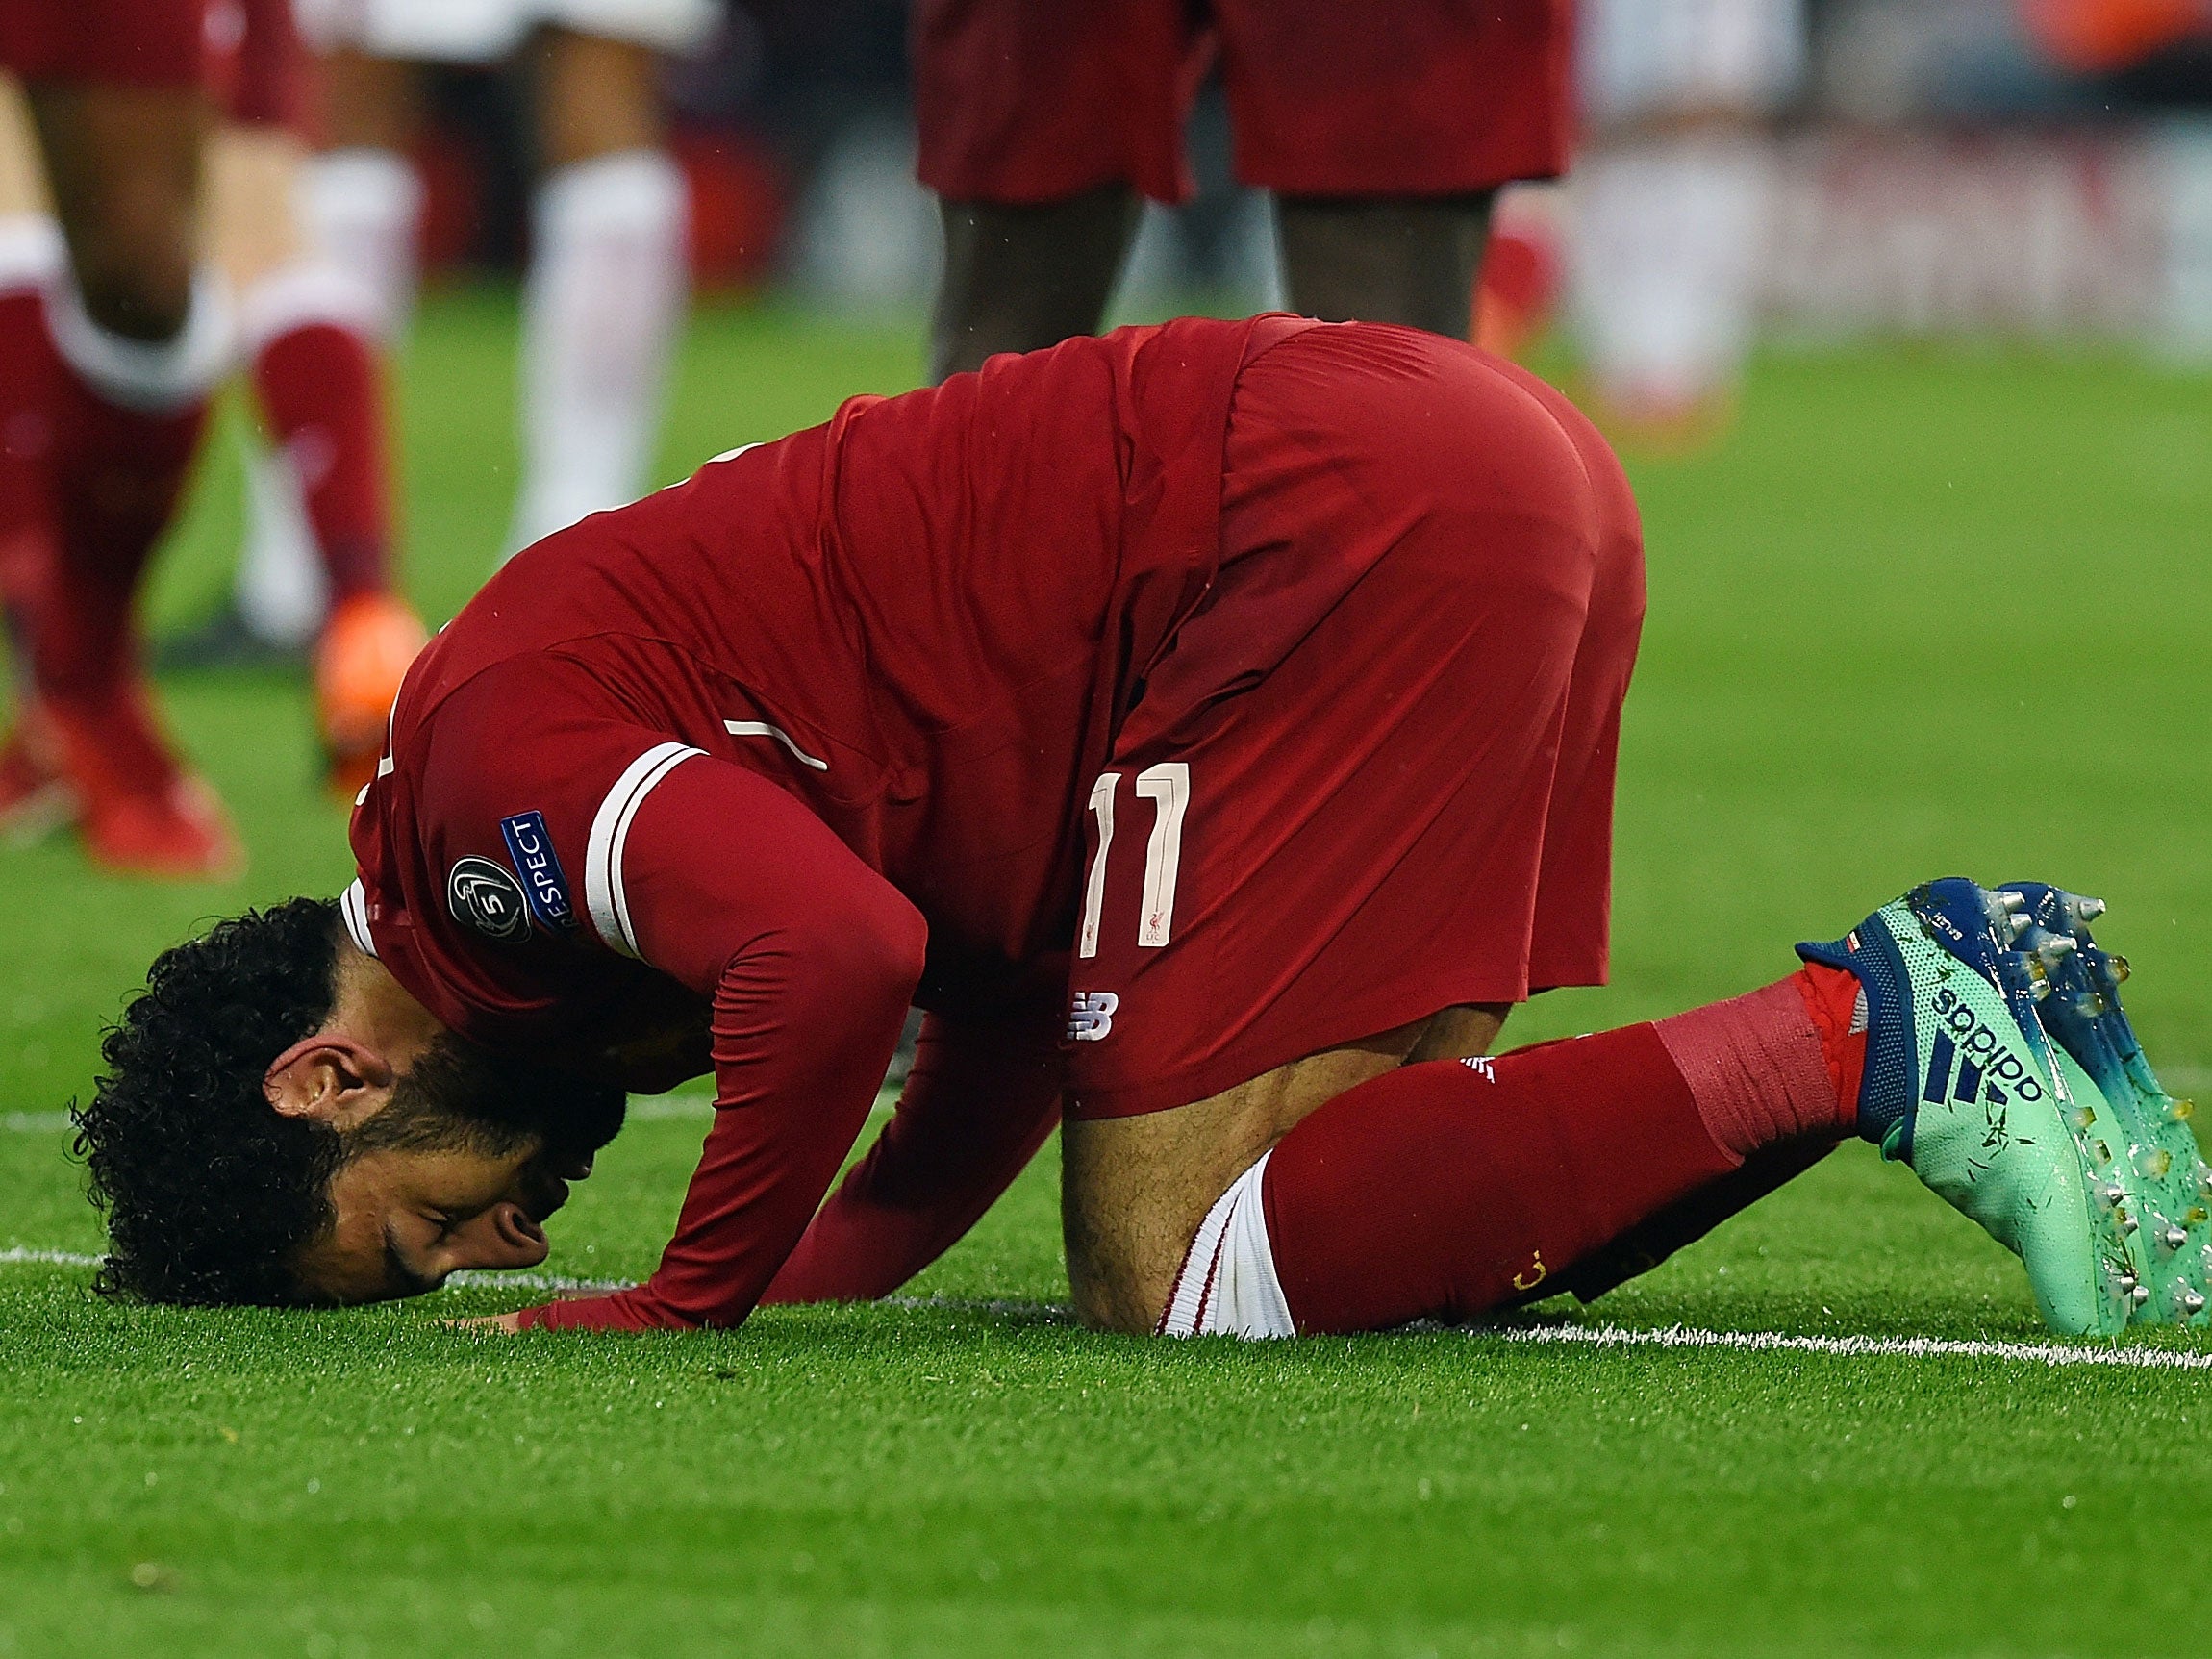 Mohamed Salah has been in sensational form for Liverpool this season